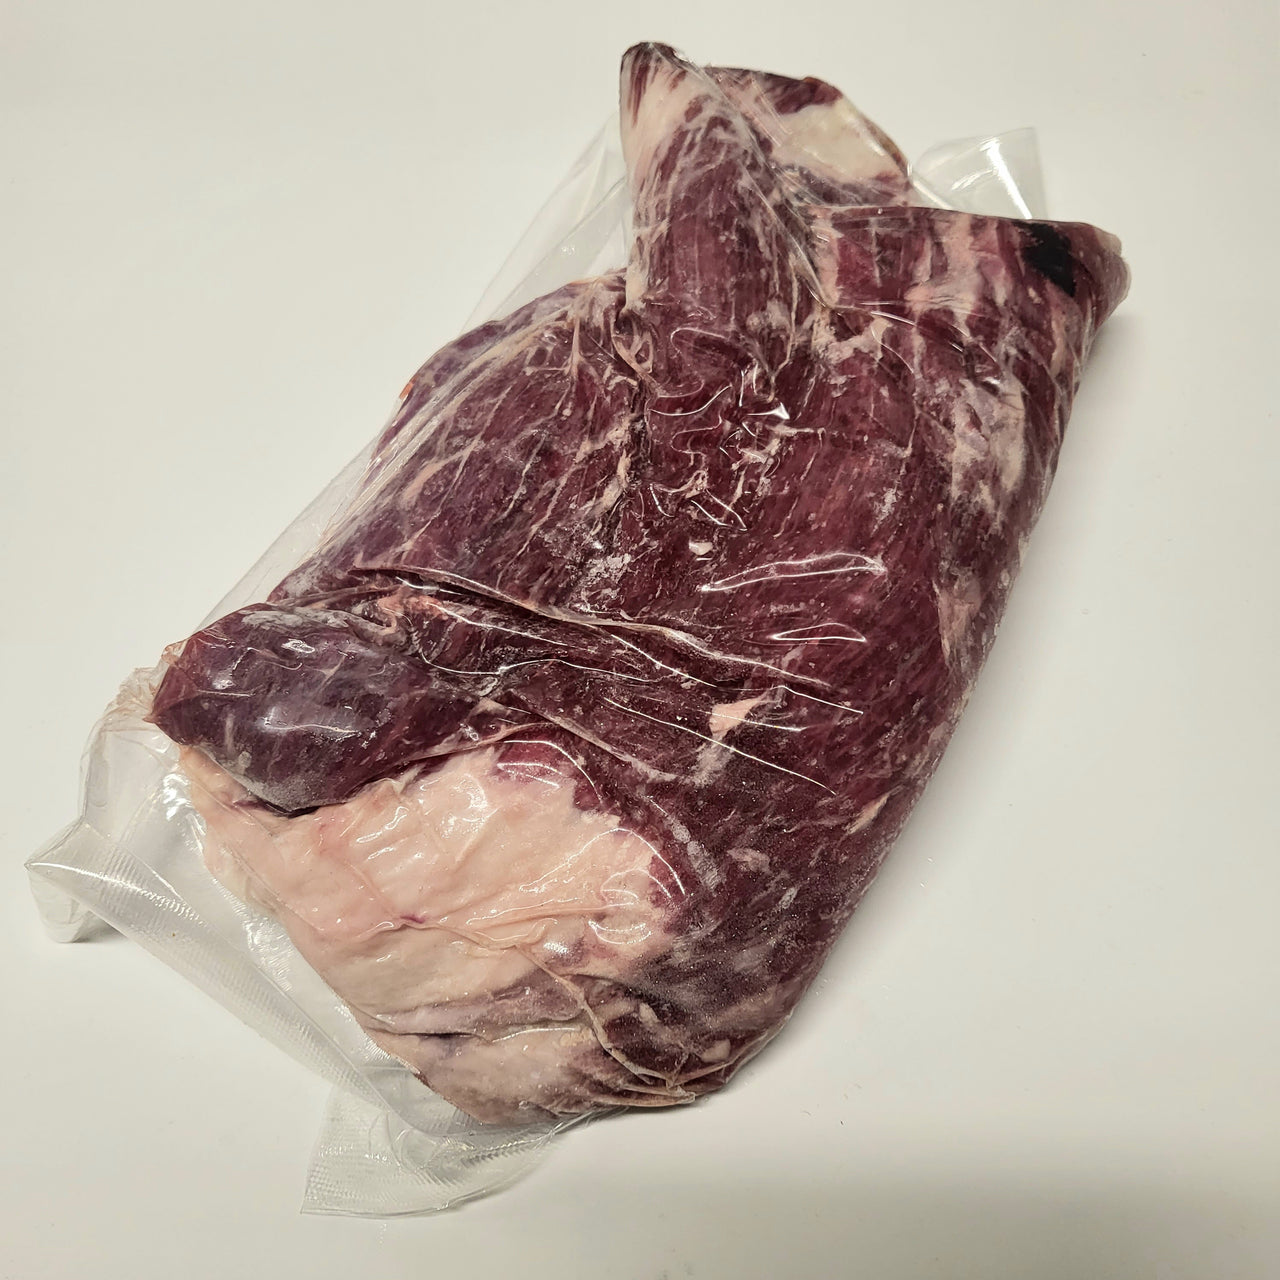 Grass Fed Grass FInished Beef Flank Steak Japanese Black Wagyu Beef Full Blood AGED 21+ Days